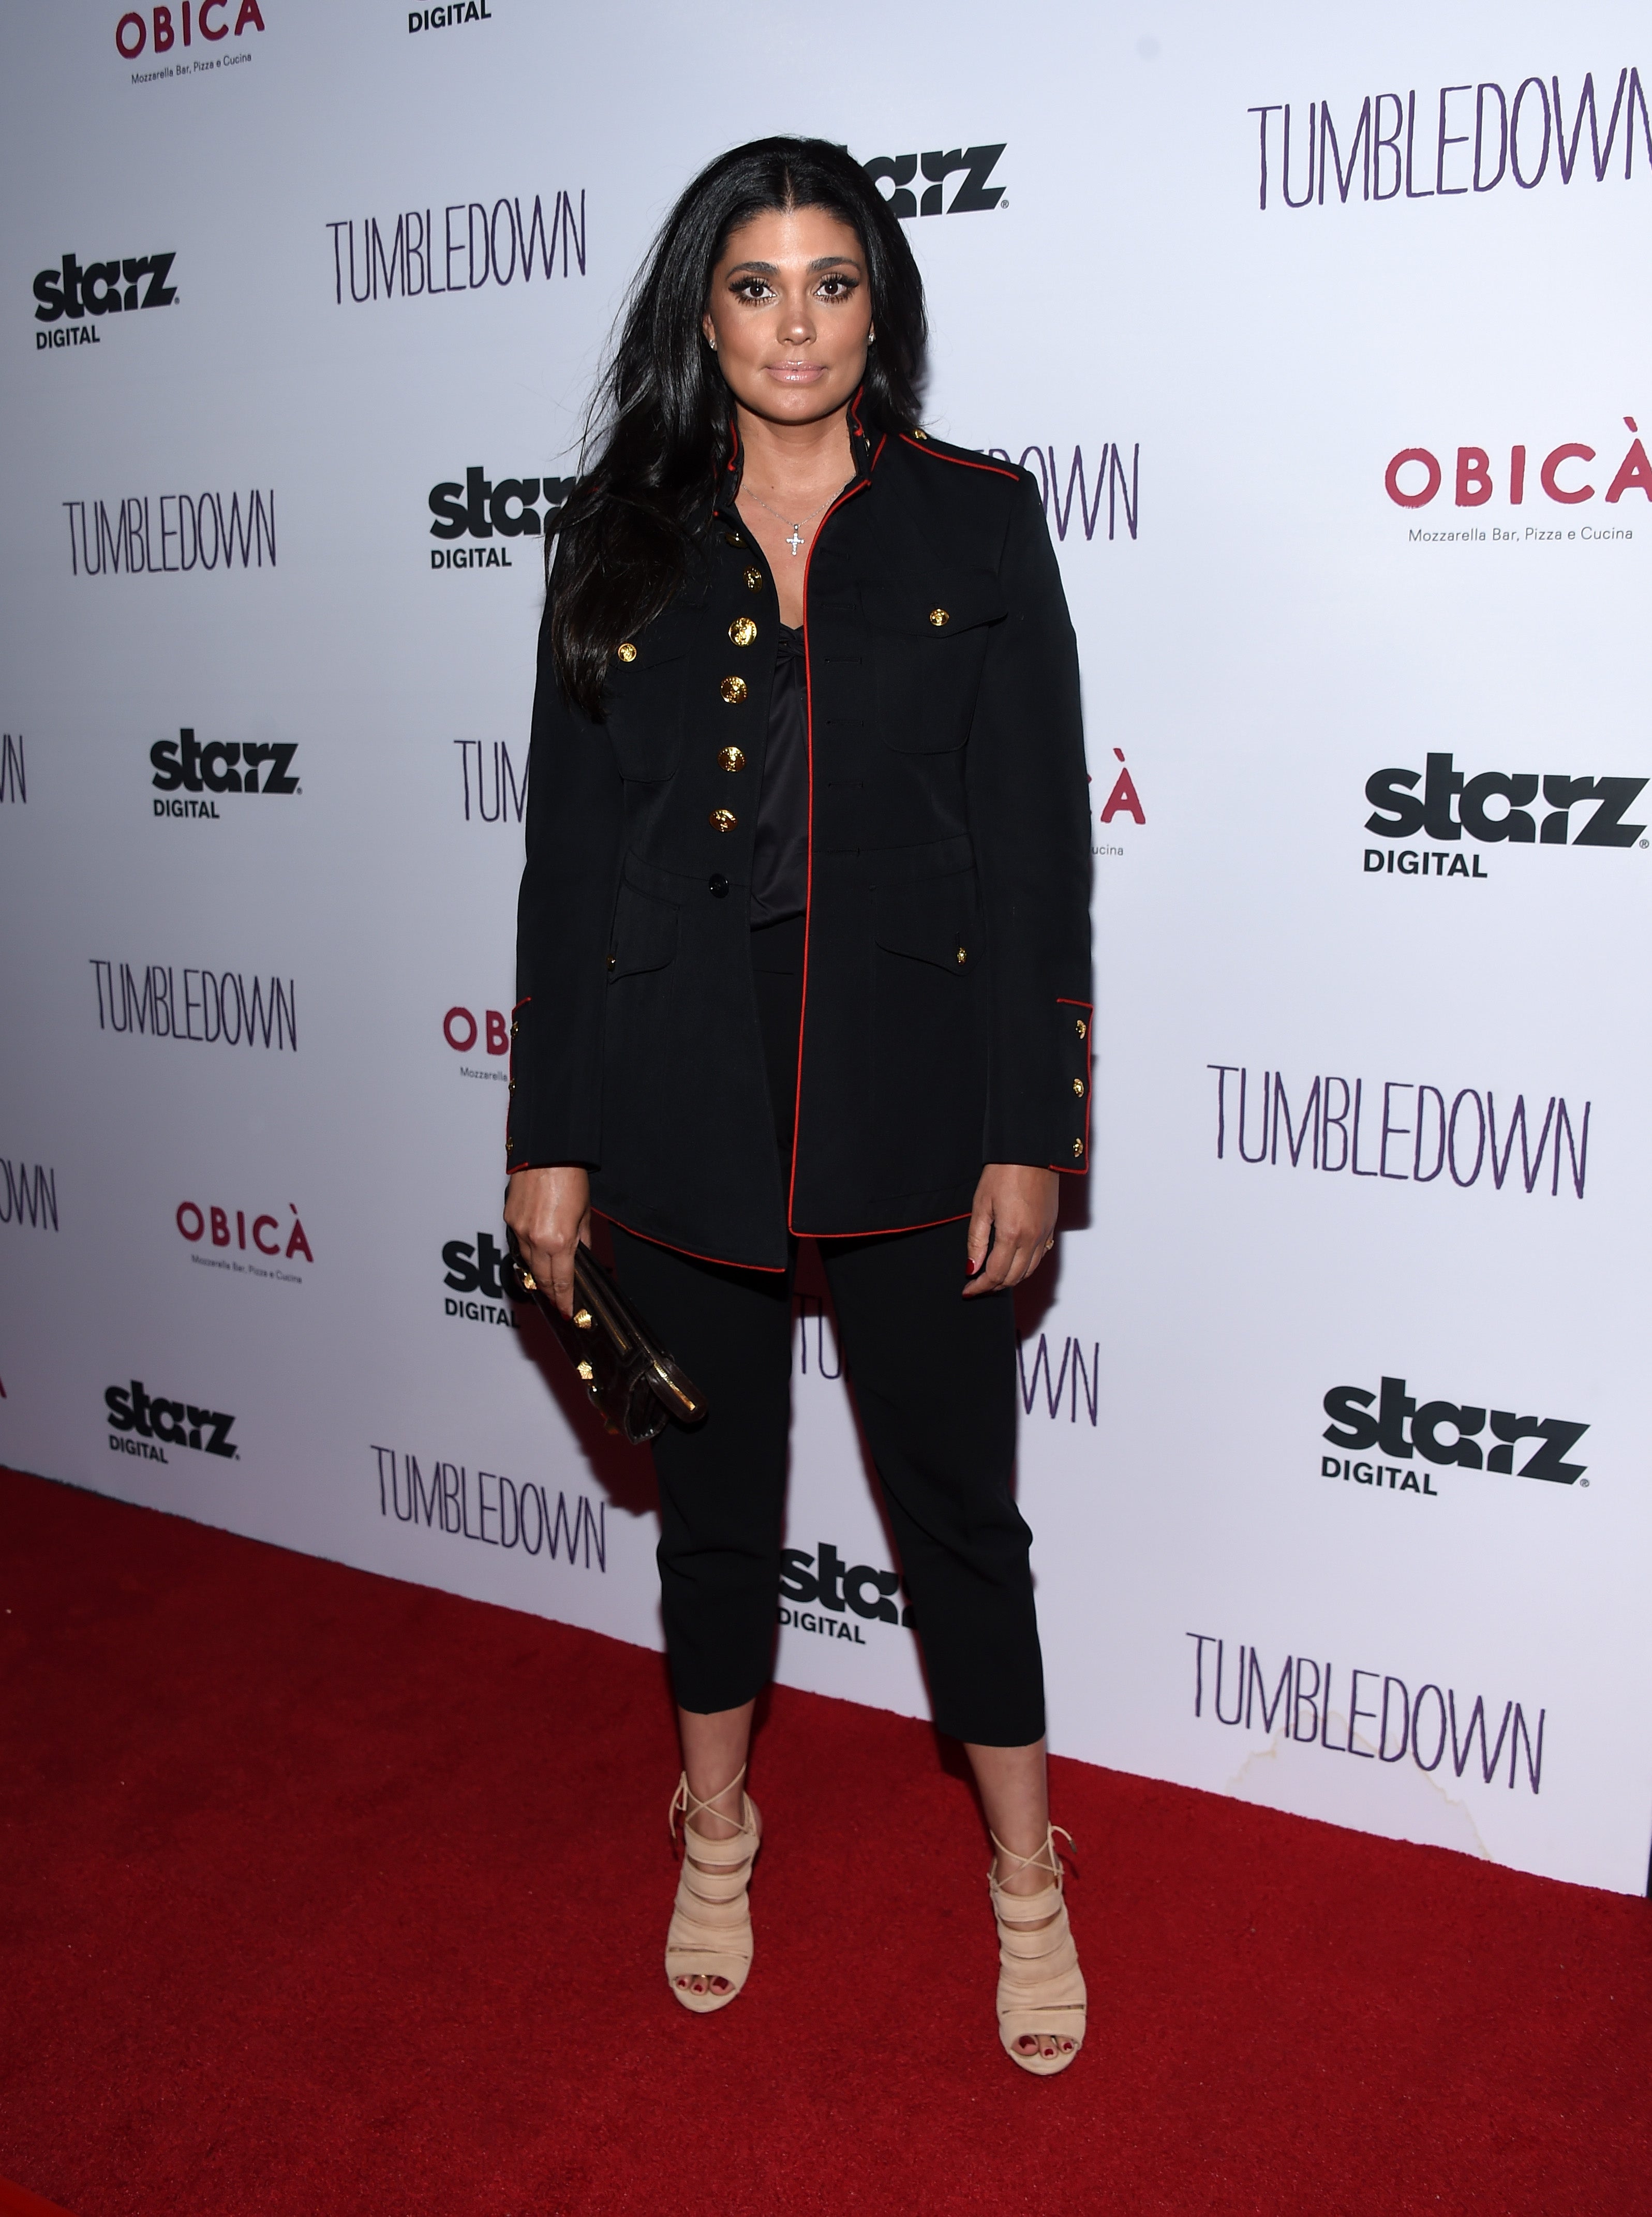 Rachel Roy Releases Statement, Isn't 'Becky with the Good Hair'
